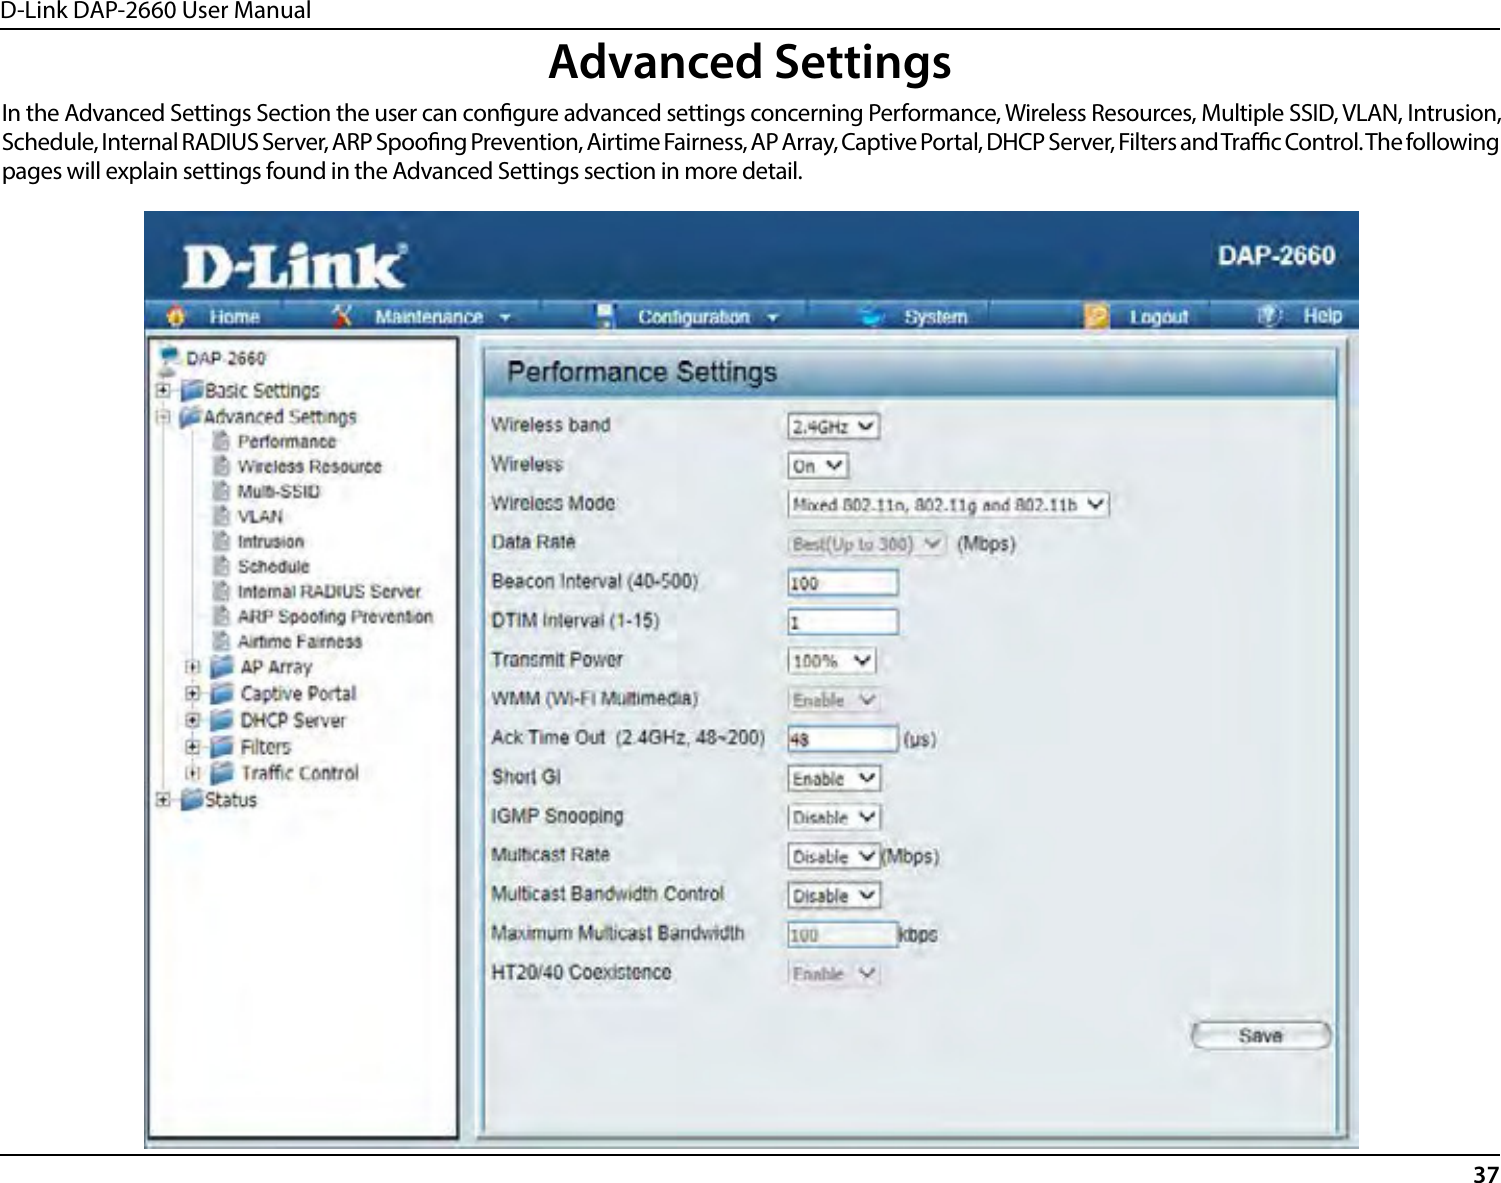 D-Link DAP-2660 User Manual37Advanced SettingsIn the Advanced Settings Section the user can congure advanced settings concerning Performance, Wireless Resources, Multiple SSID, VLAN, Intrusion, Schedule, Internal RADIUS Server, ARP Spoong Prevention, Airtime Fairness, AP Array, Captive Portal, DHCP Server, Filters and Trac Control. The following pages will explain settings found in the Advanced Settings section in more detail.